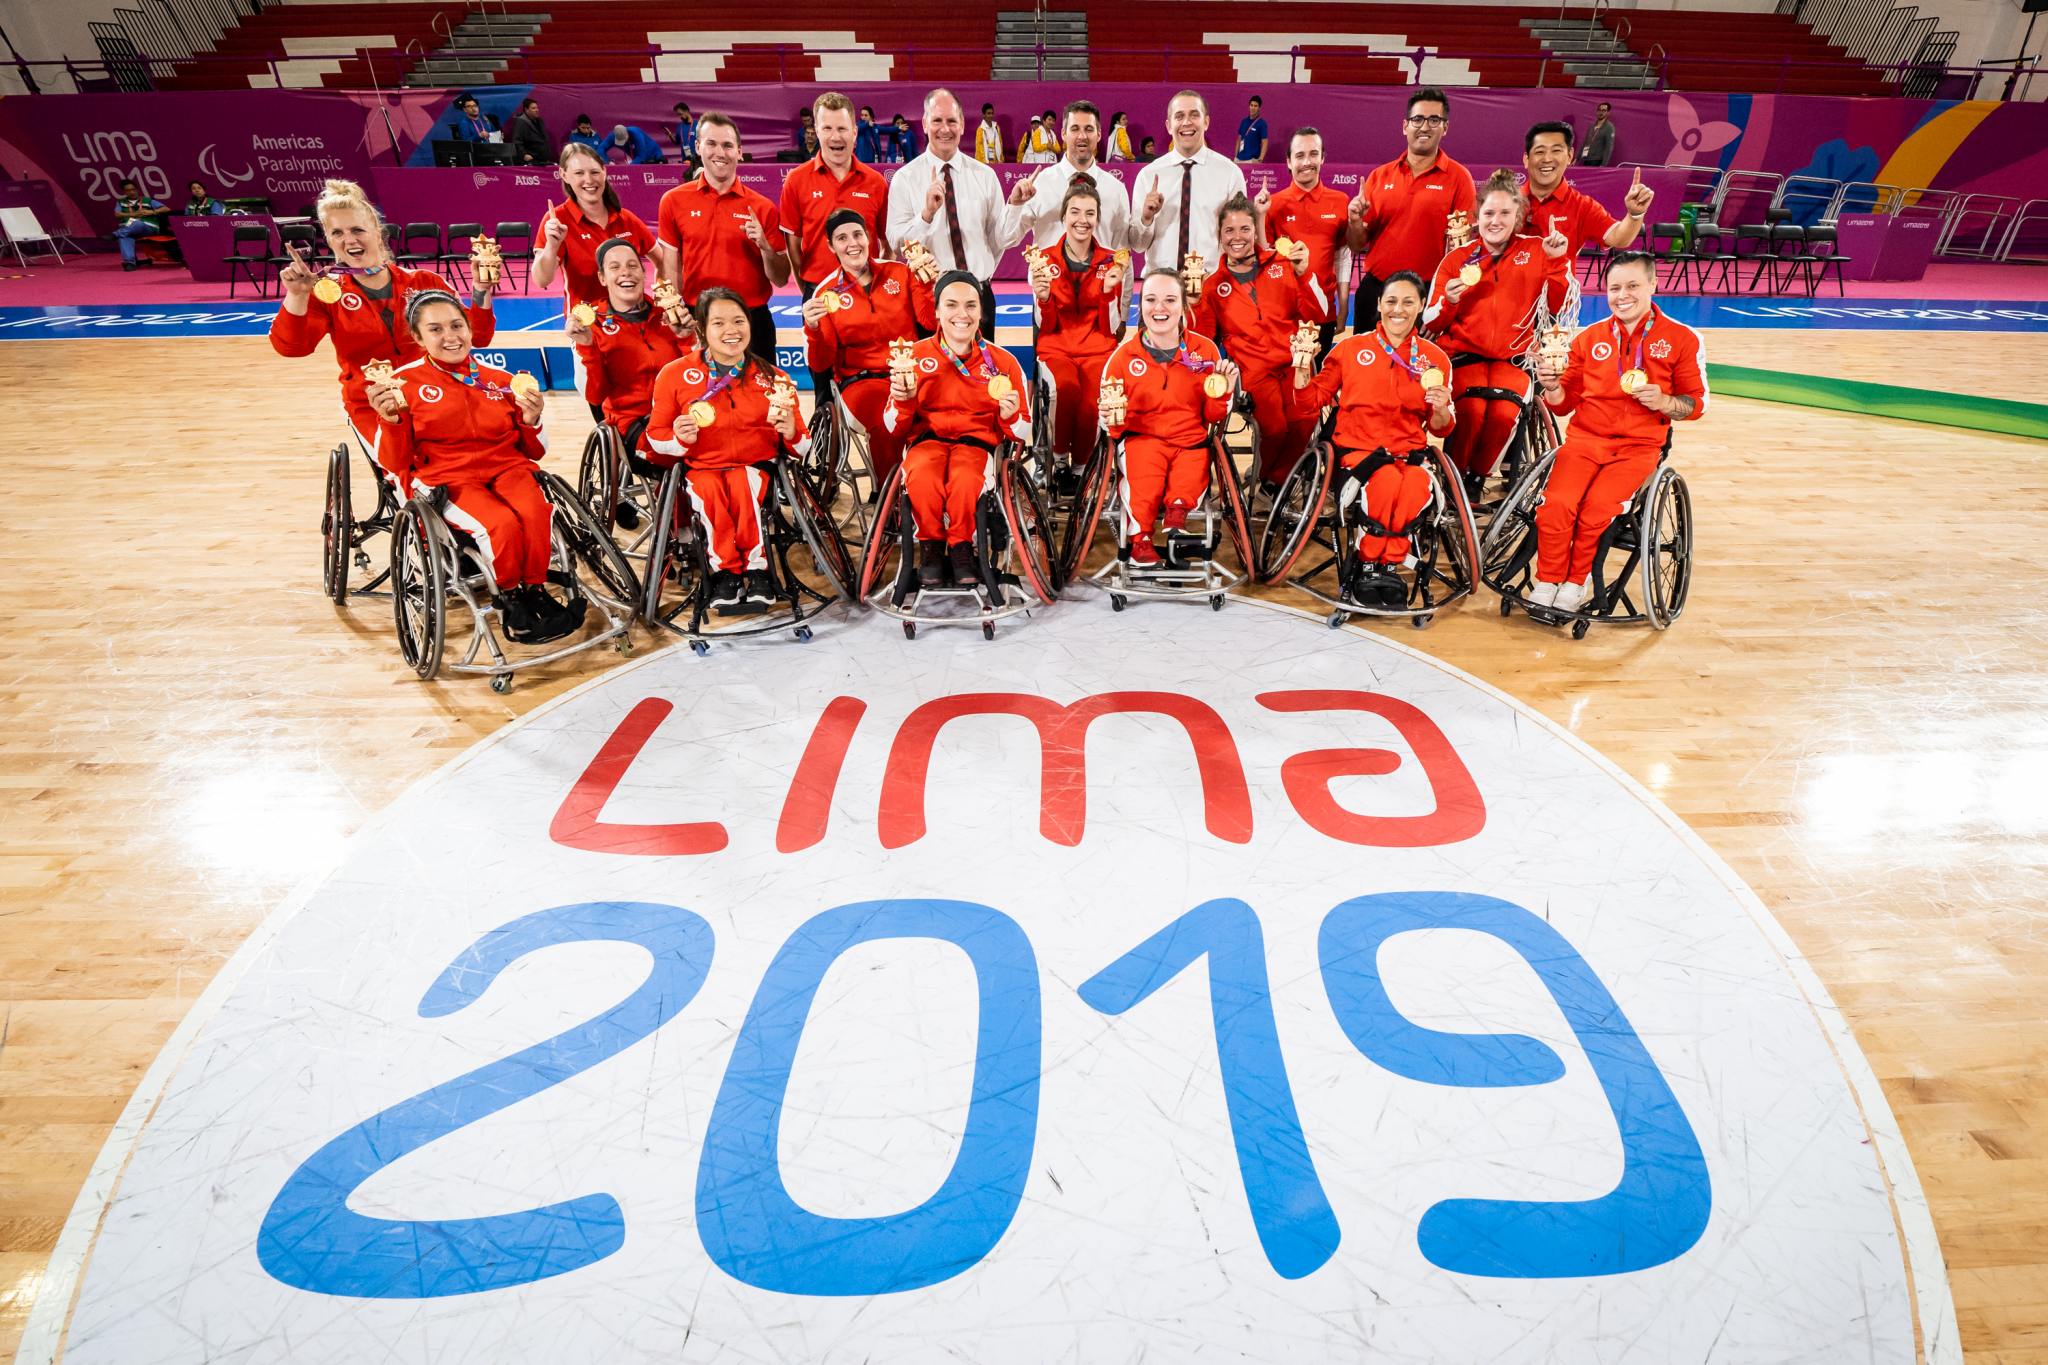 Canada won the gold medal in the women's basketball at the last Parapan American Games in Lima four years ago as Chile finished eighth ©IWBF